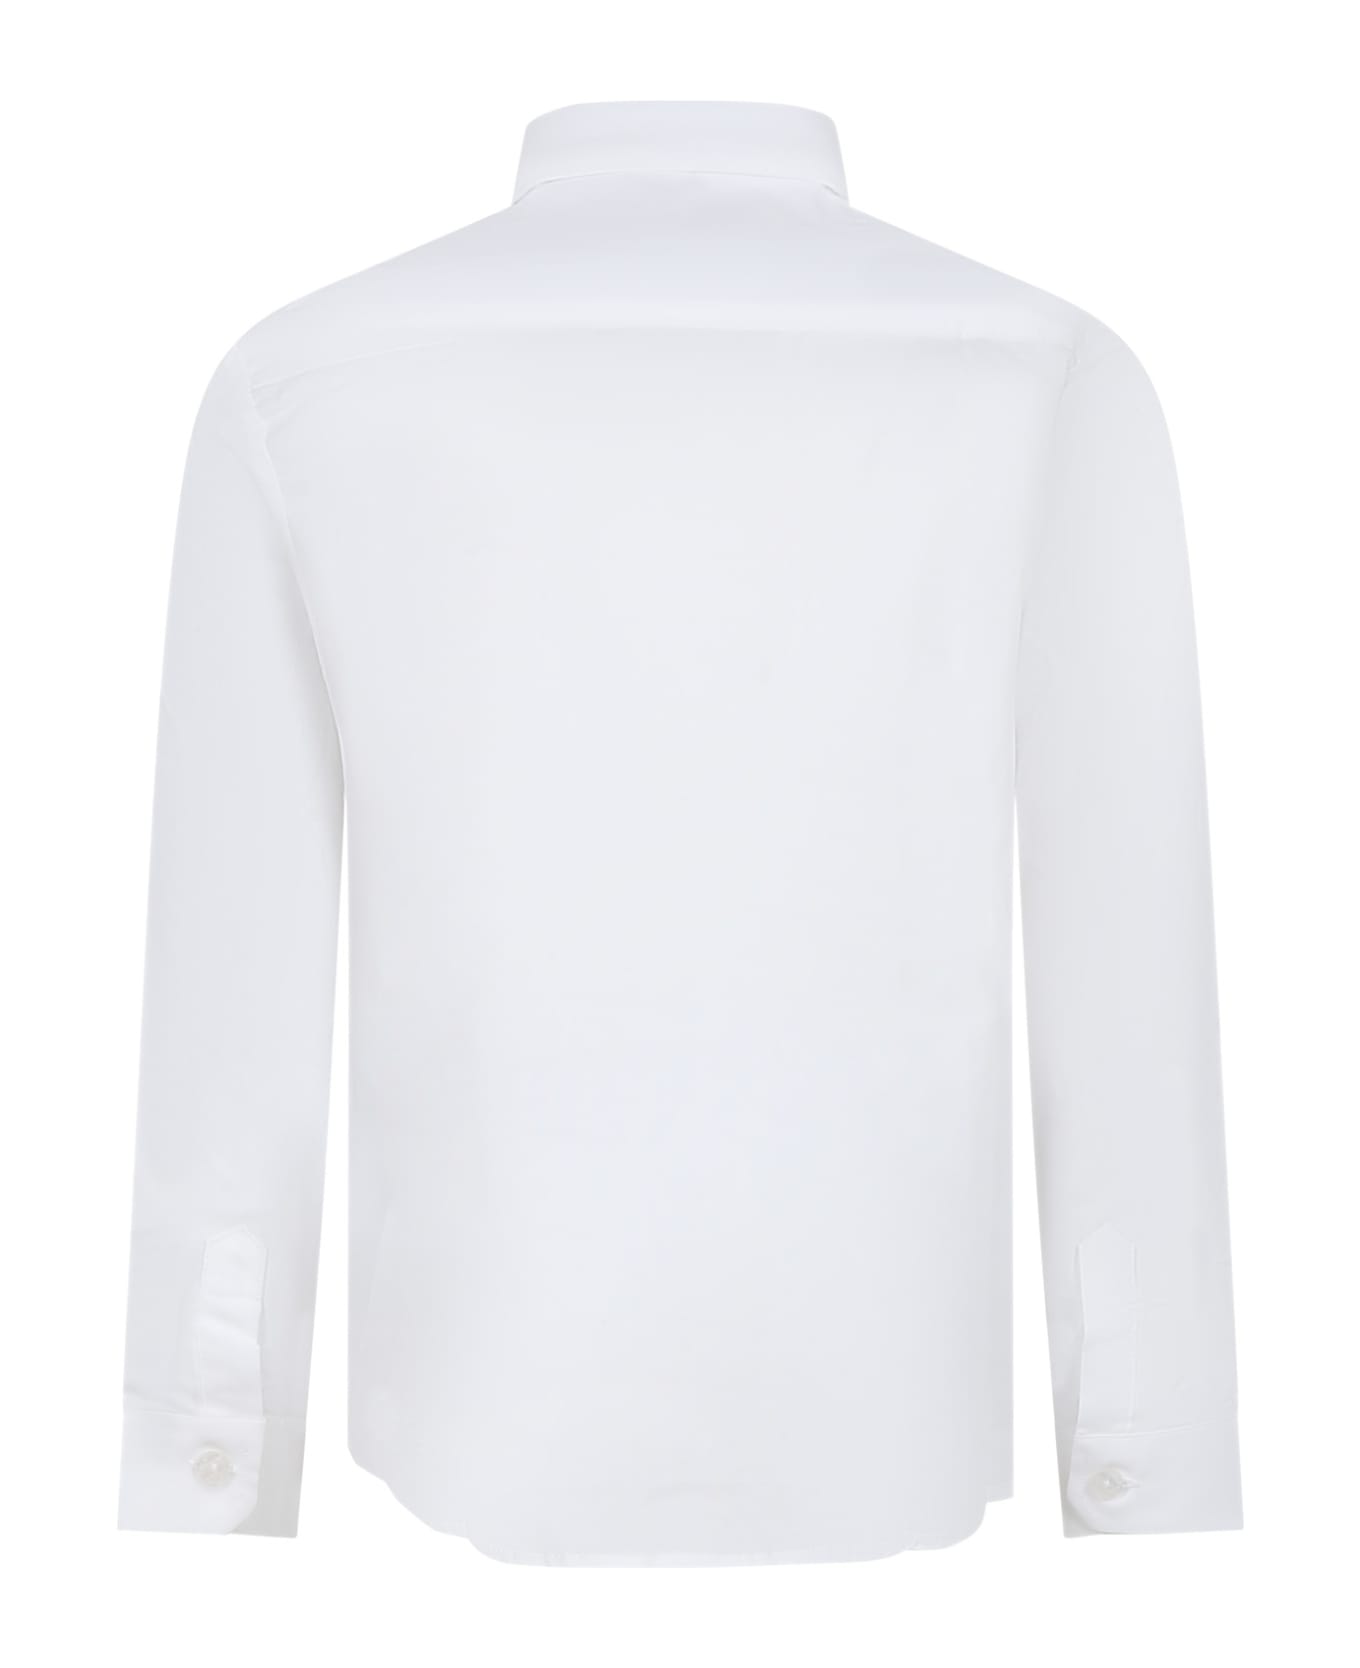 MSGM White Shirt For Boy With Logo And Writing - White